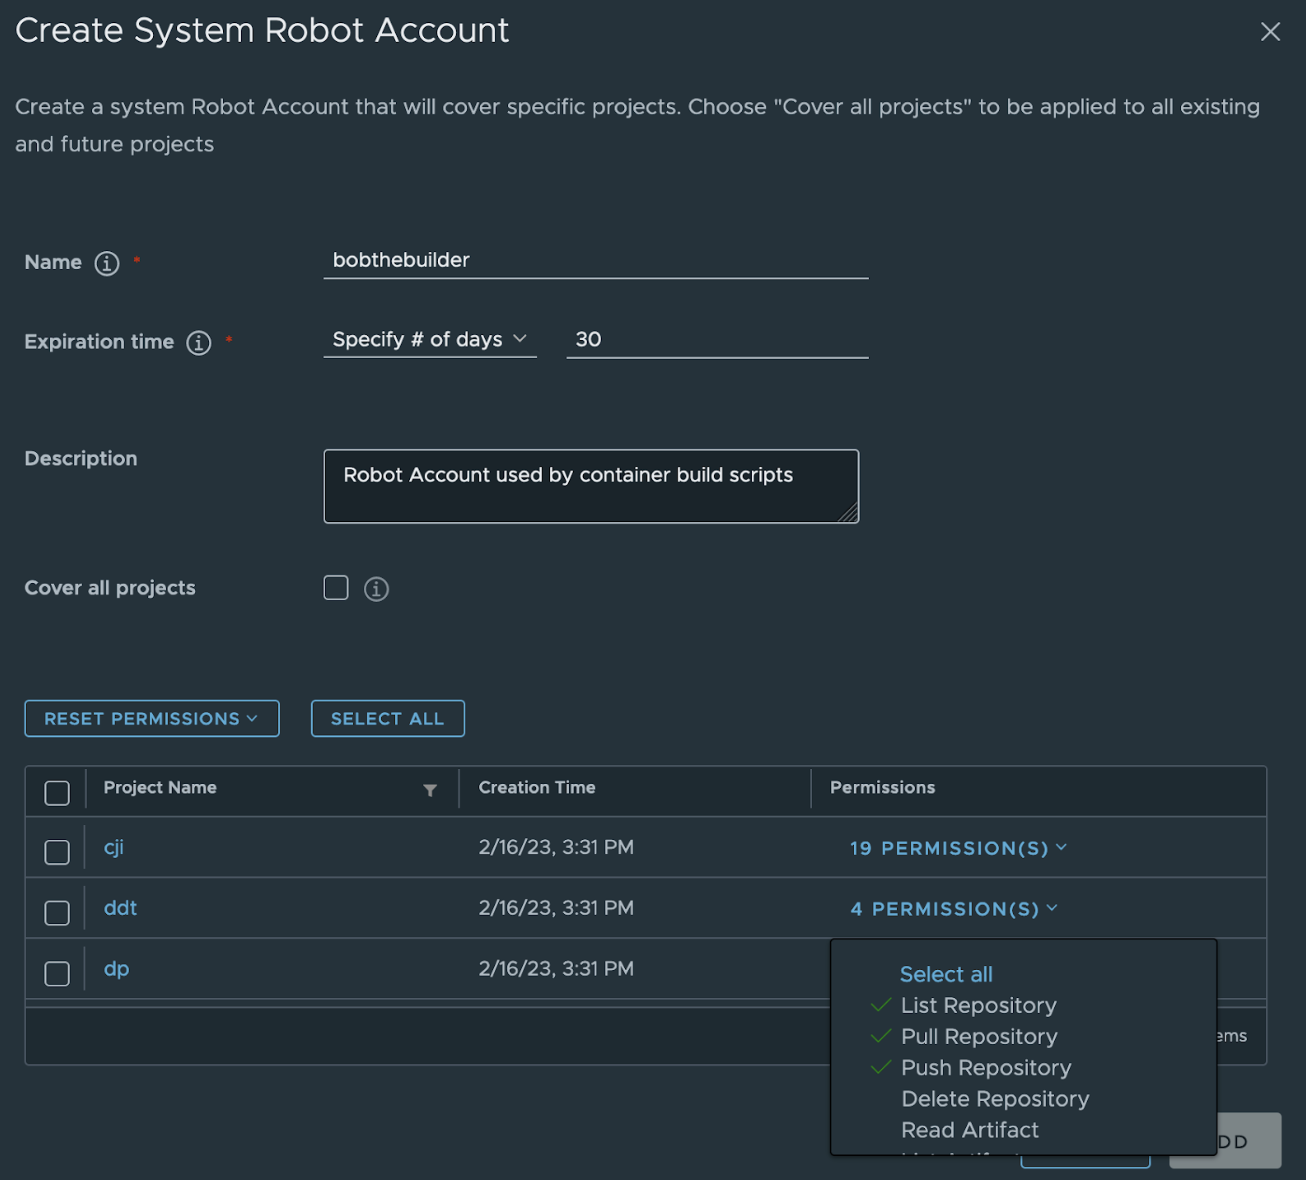 Image creating system robot account